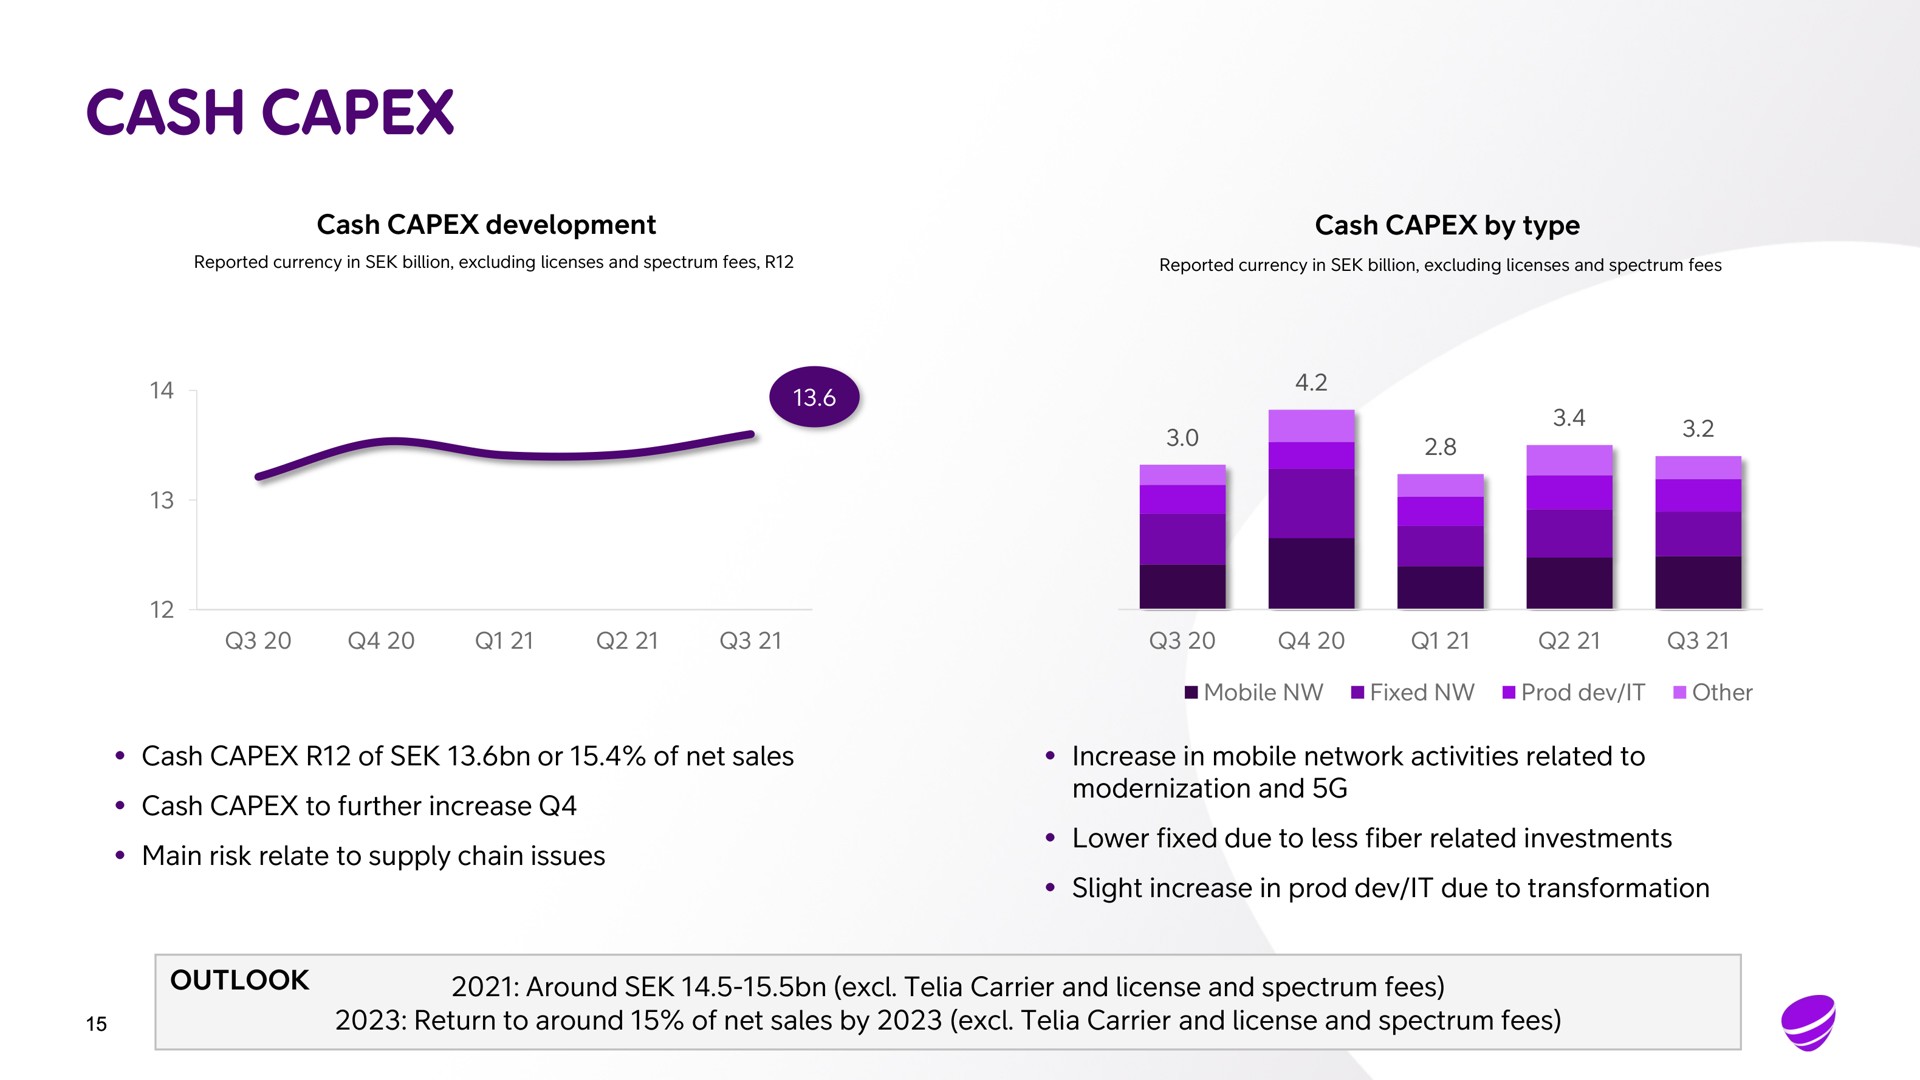 cash cash development cash by type cash of or of net sales increase in mobile network activities related to cash to further increase main risk relate to supply chain issues modernization and lower fixed due to less fiber related investments slight increase in prod dev it due to transformation outlook around carrier and license and spectrum fees return to around of net sales by carrier and license and spectrum fees | Telia Company